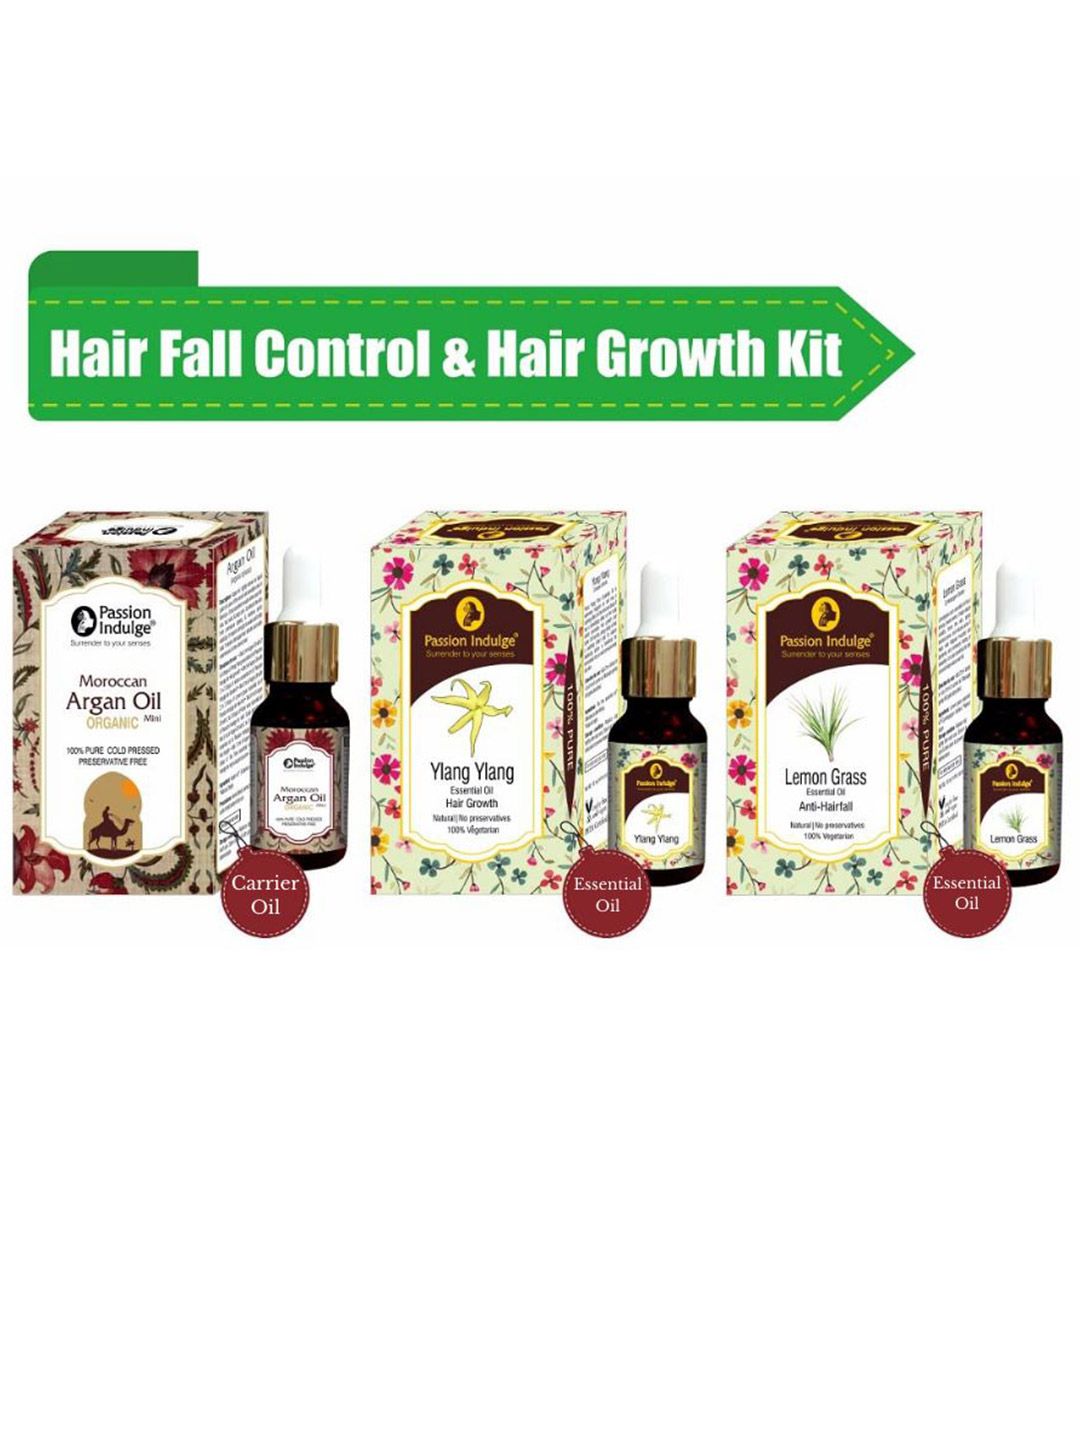 Passion Indulge Set of Moroccan Argan Oil-Ylang Ylang- Lemon Grass Essential Oils for Hair Price in India